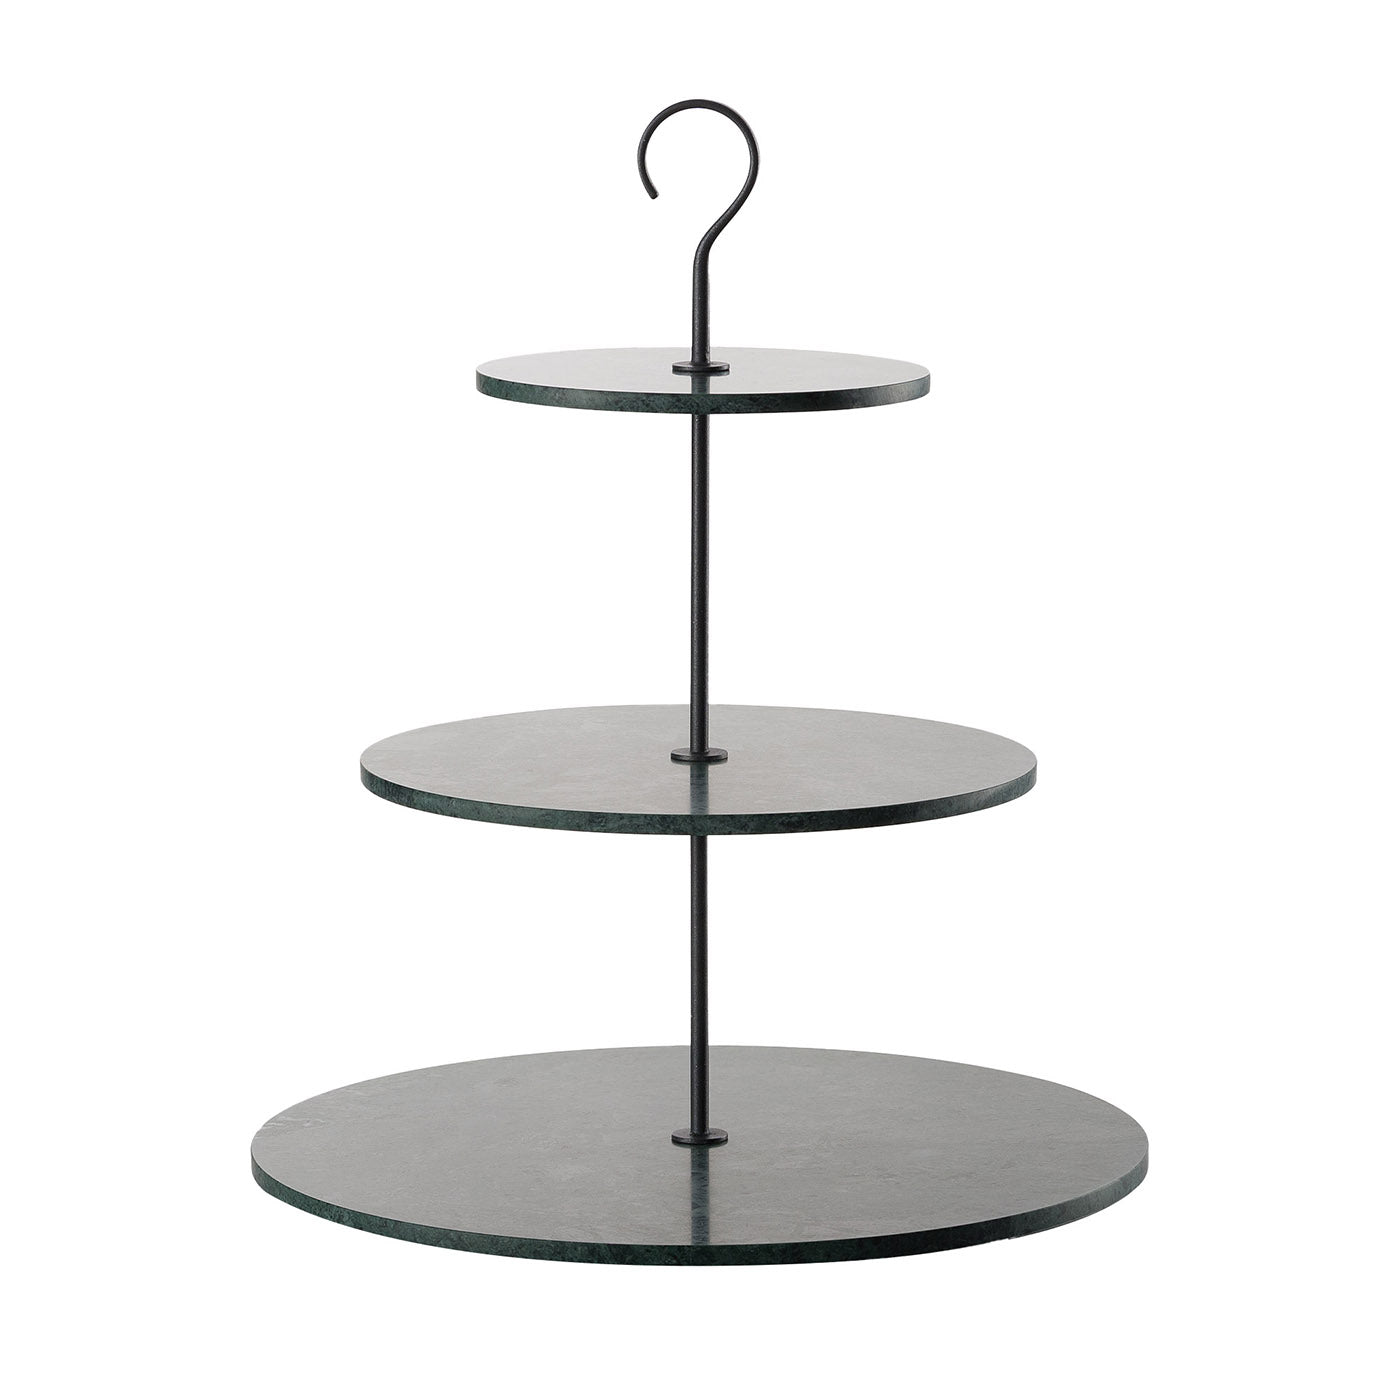 Pietra L12 Green Marble Cake Stand by Piero Lissoni - Main view